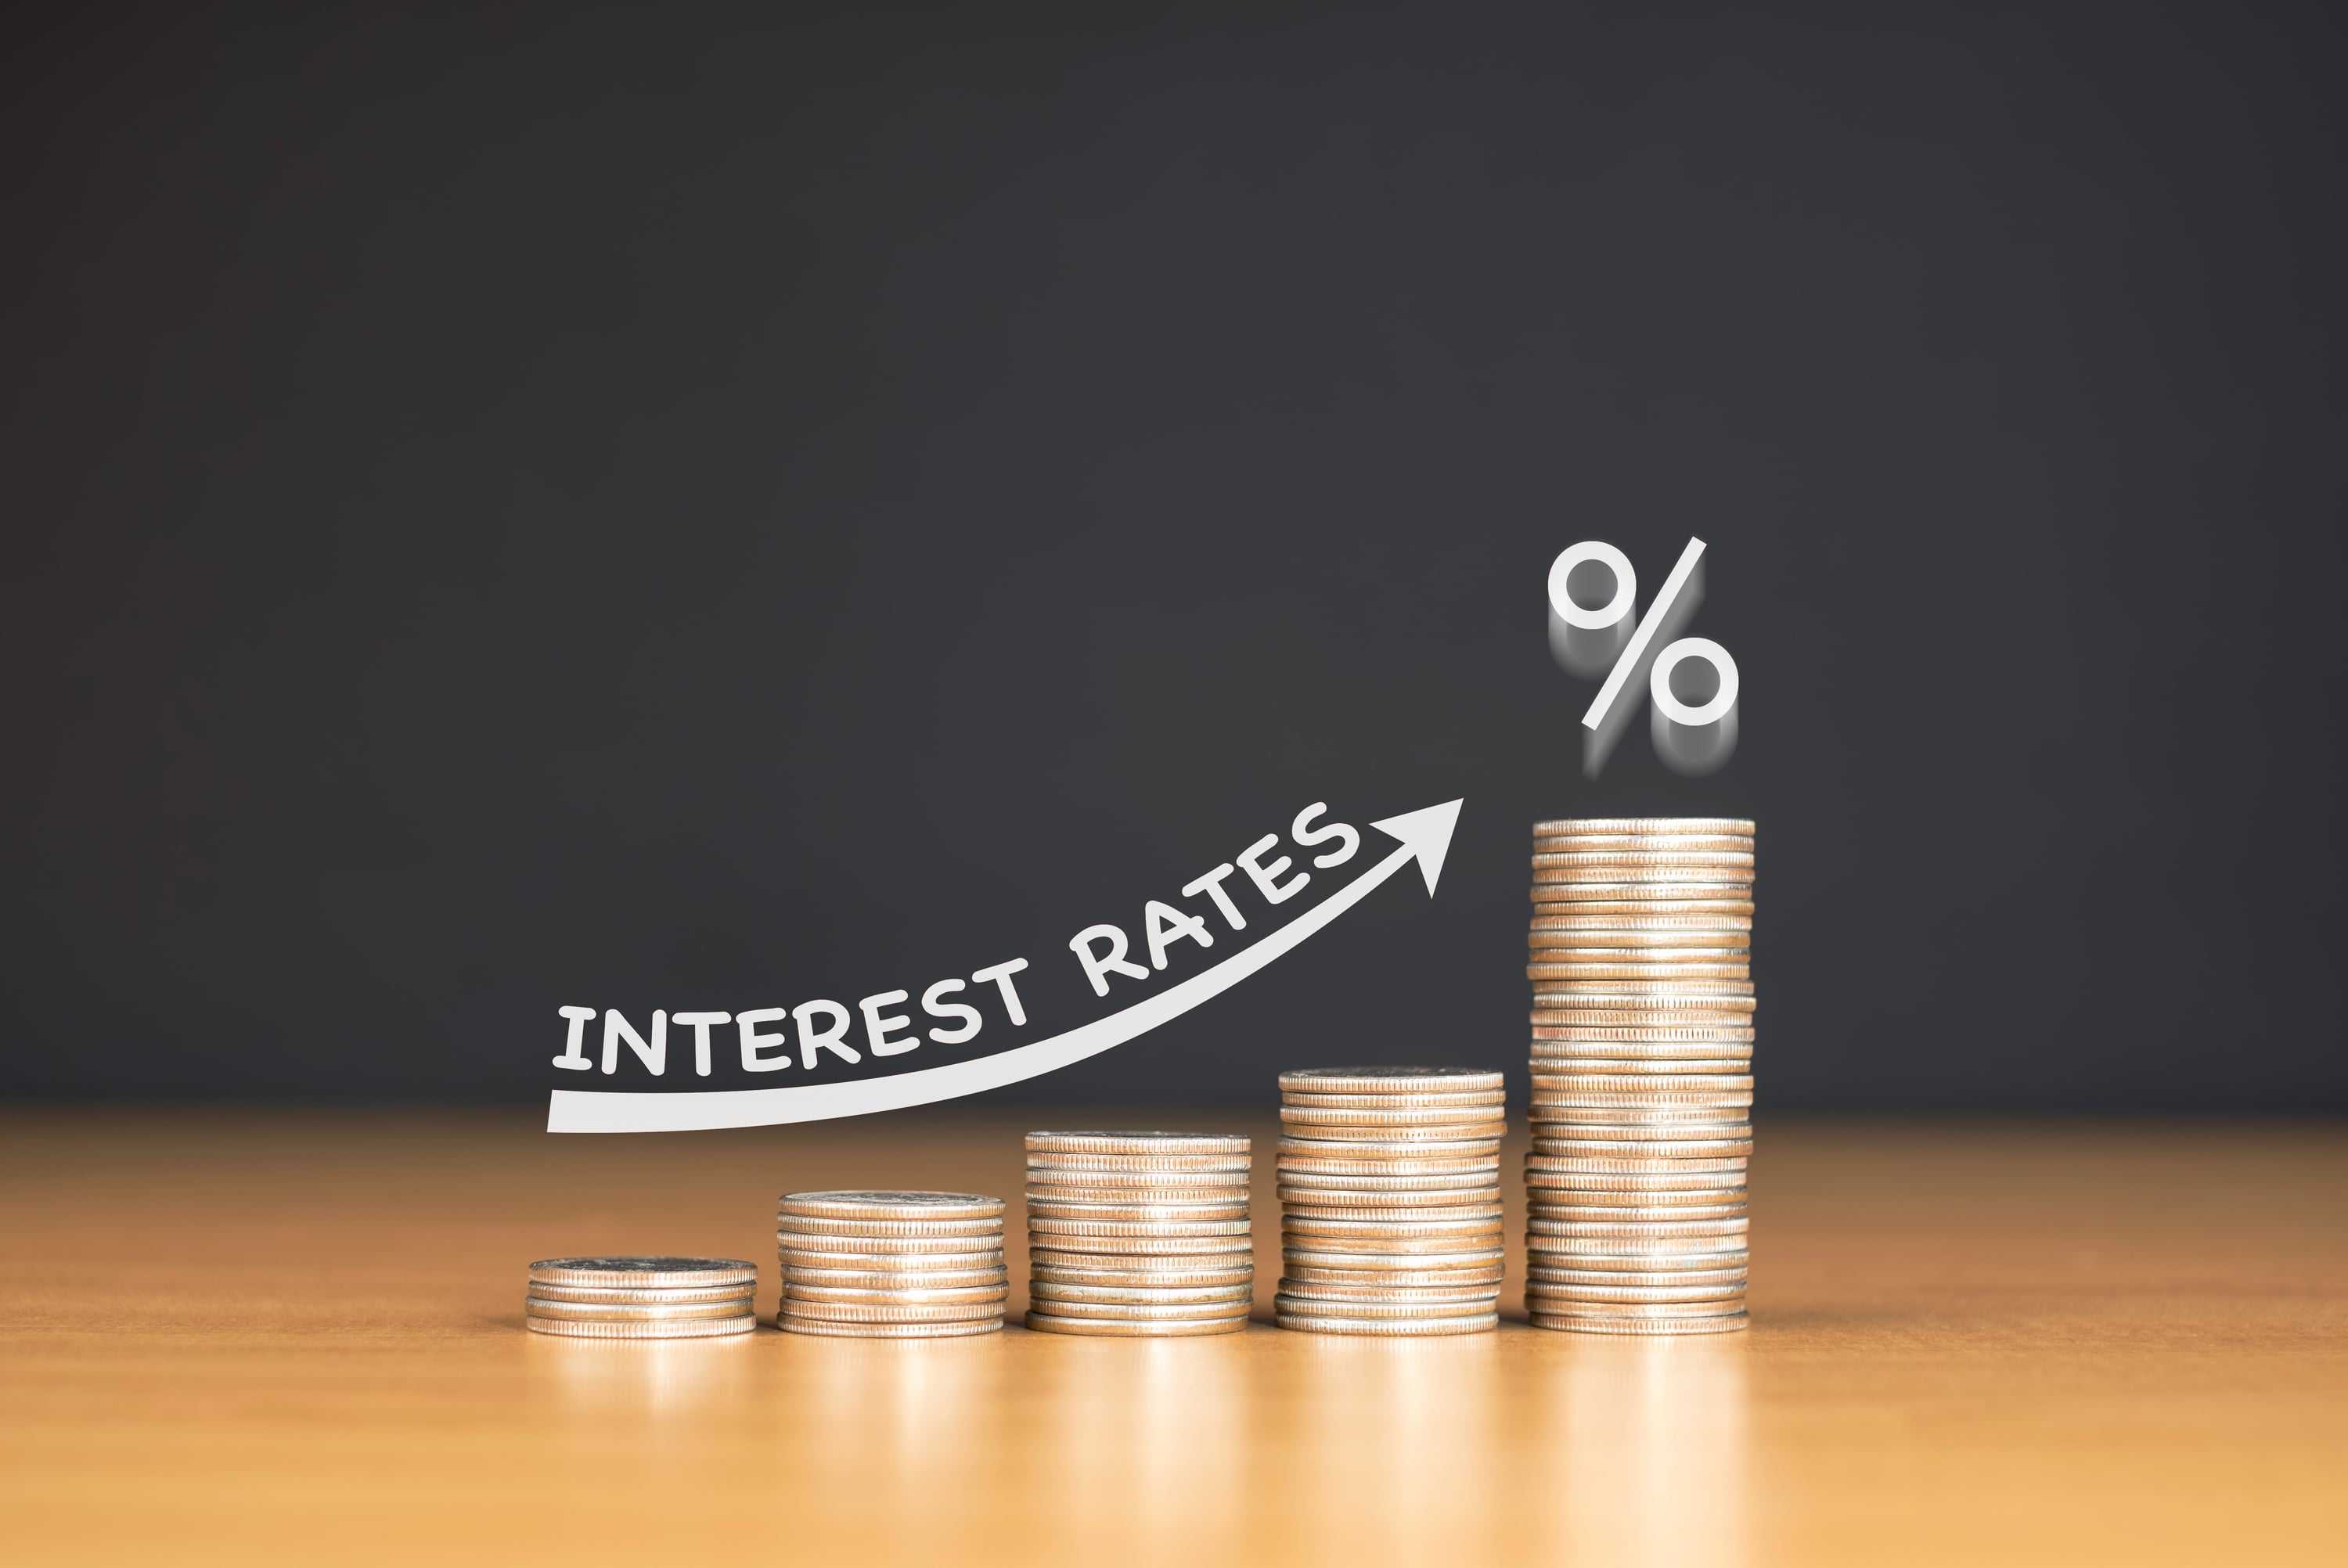 What Do Rising Interest Rates Mean for You? - Effects & How to Prepare